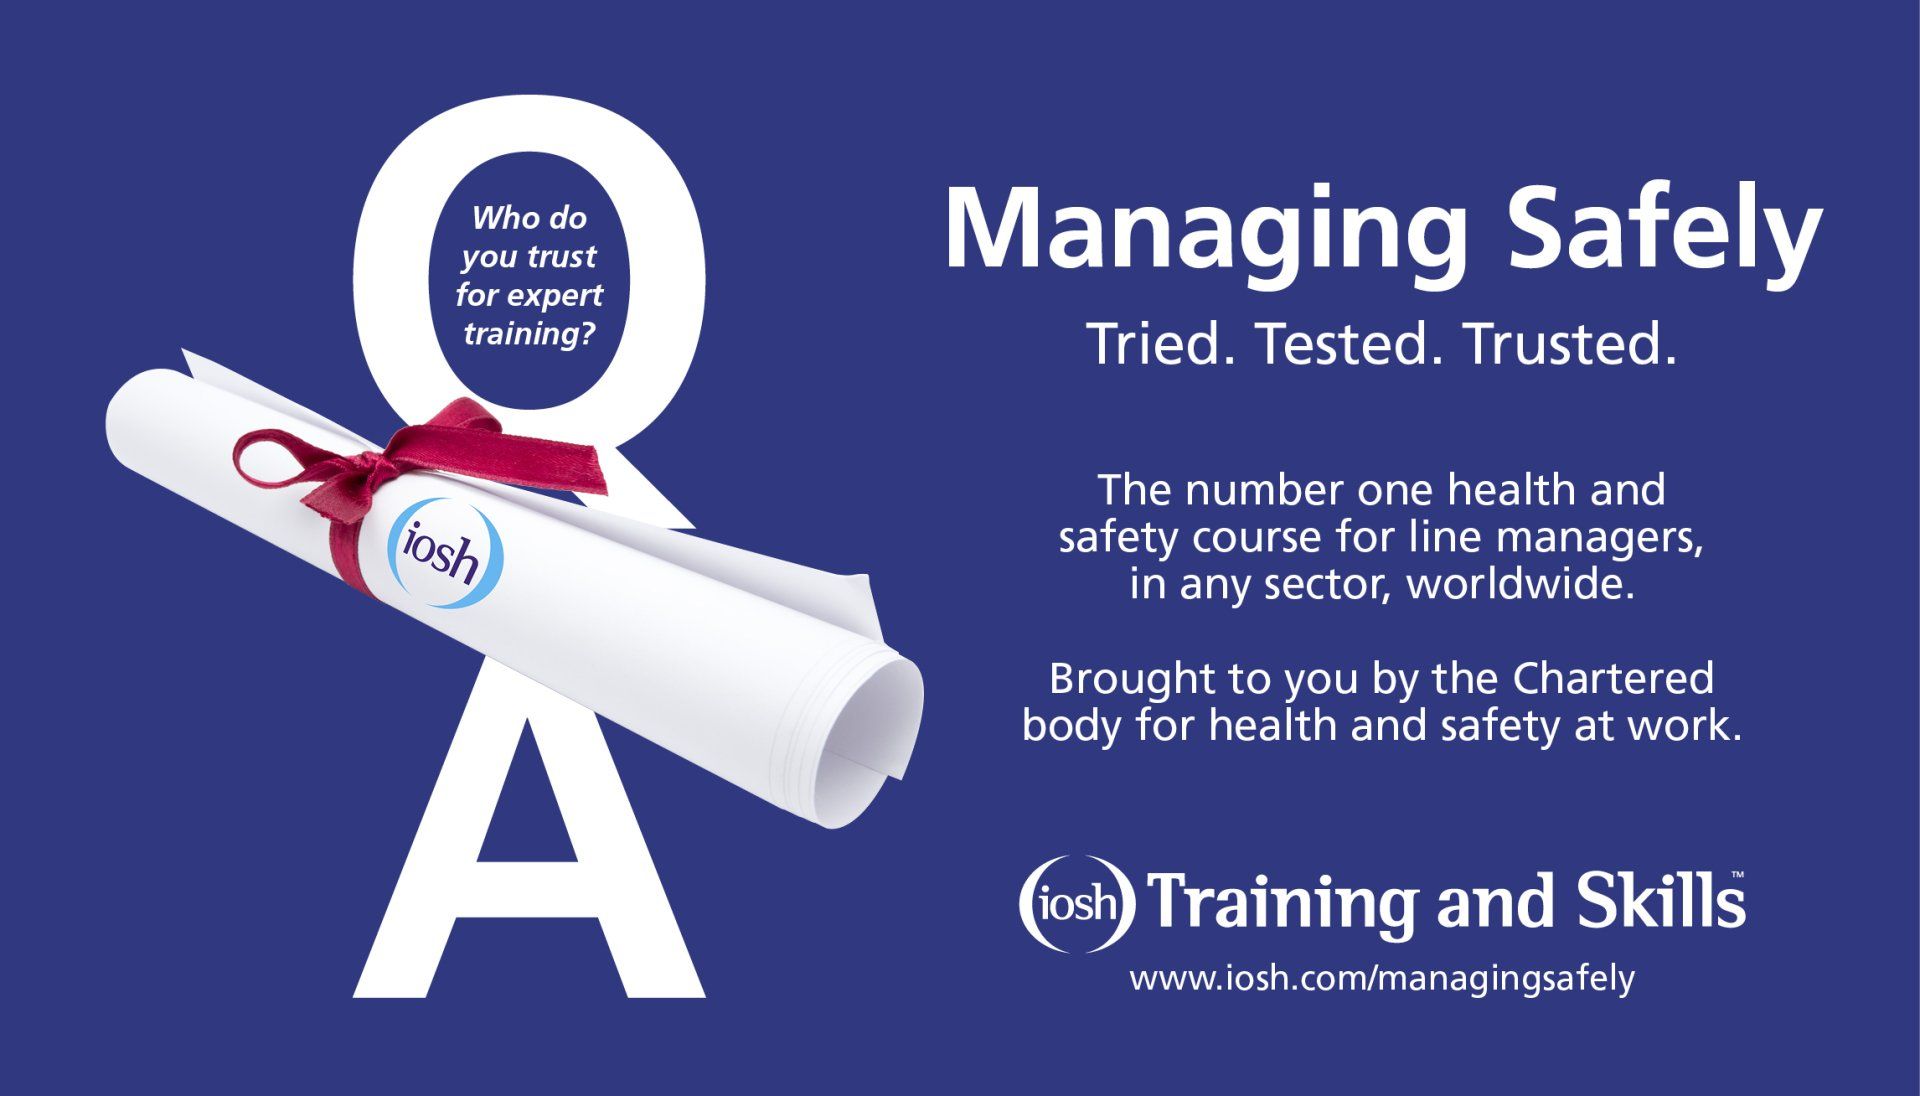 Managing Safely. Number one Health and Safety course for line managers in any sector, worldwide.